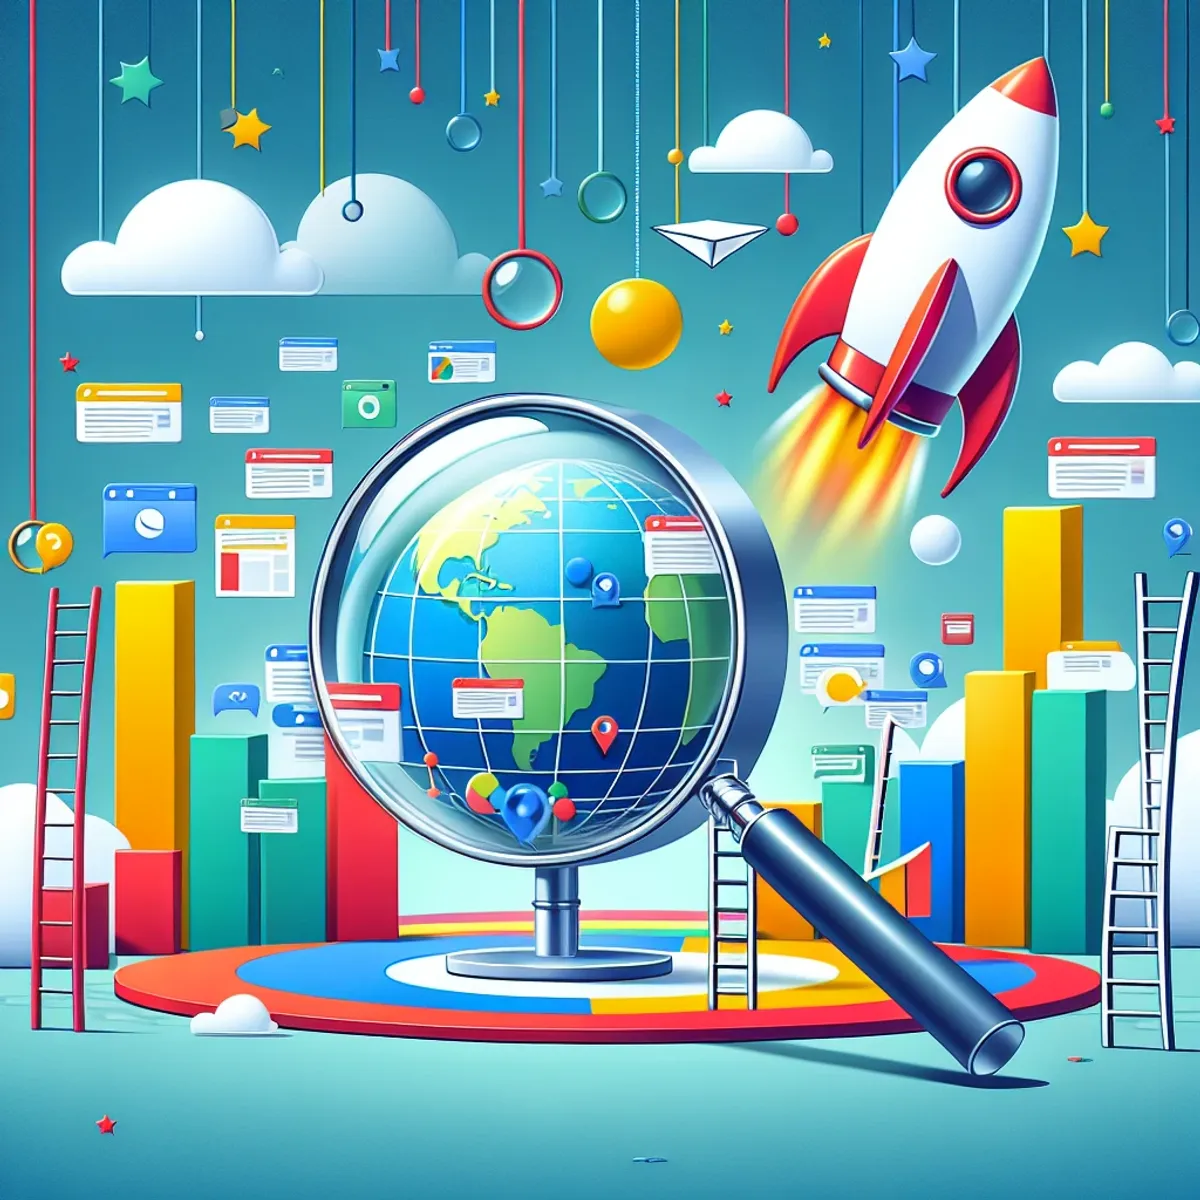 SEO tools visual metaphors: A magnifying glass examines a globe with webpages, a rocket soars upwards, and a ladder symbolizes progress. Color scheme inspired by Google's colors.